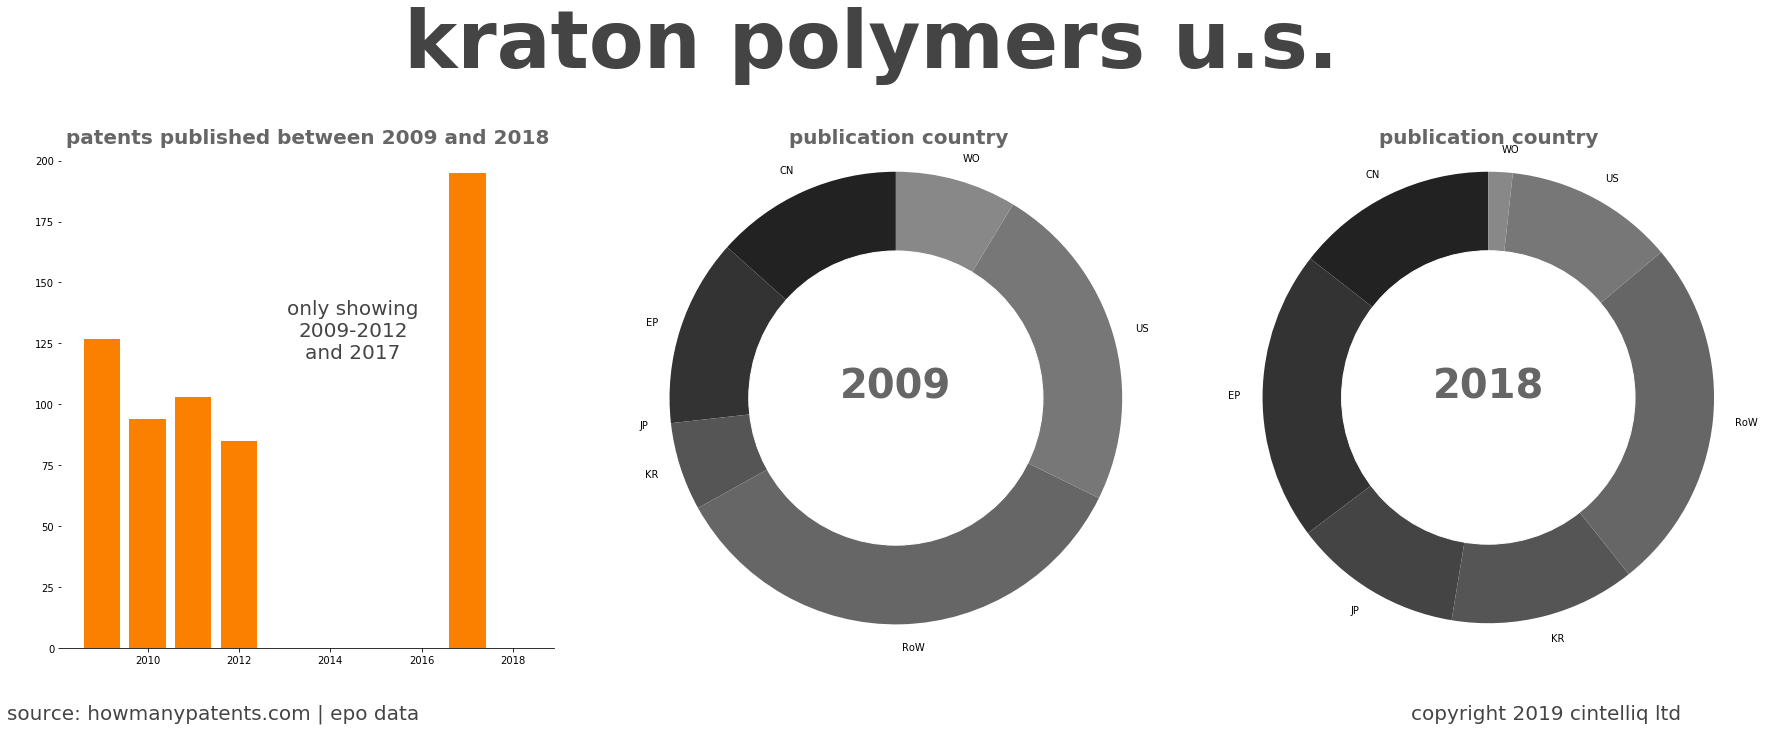 summary of patents for Kraton Polymers U.S.